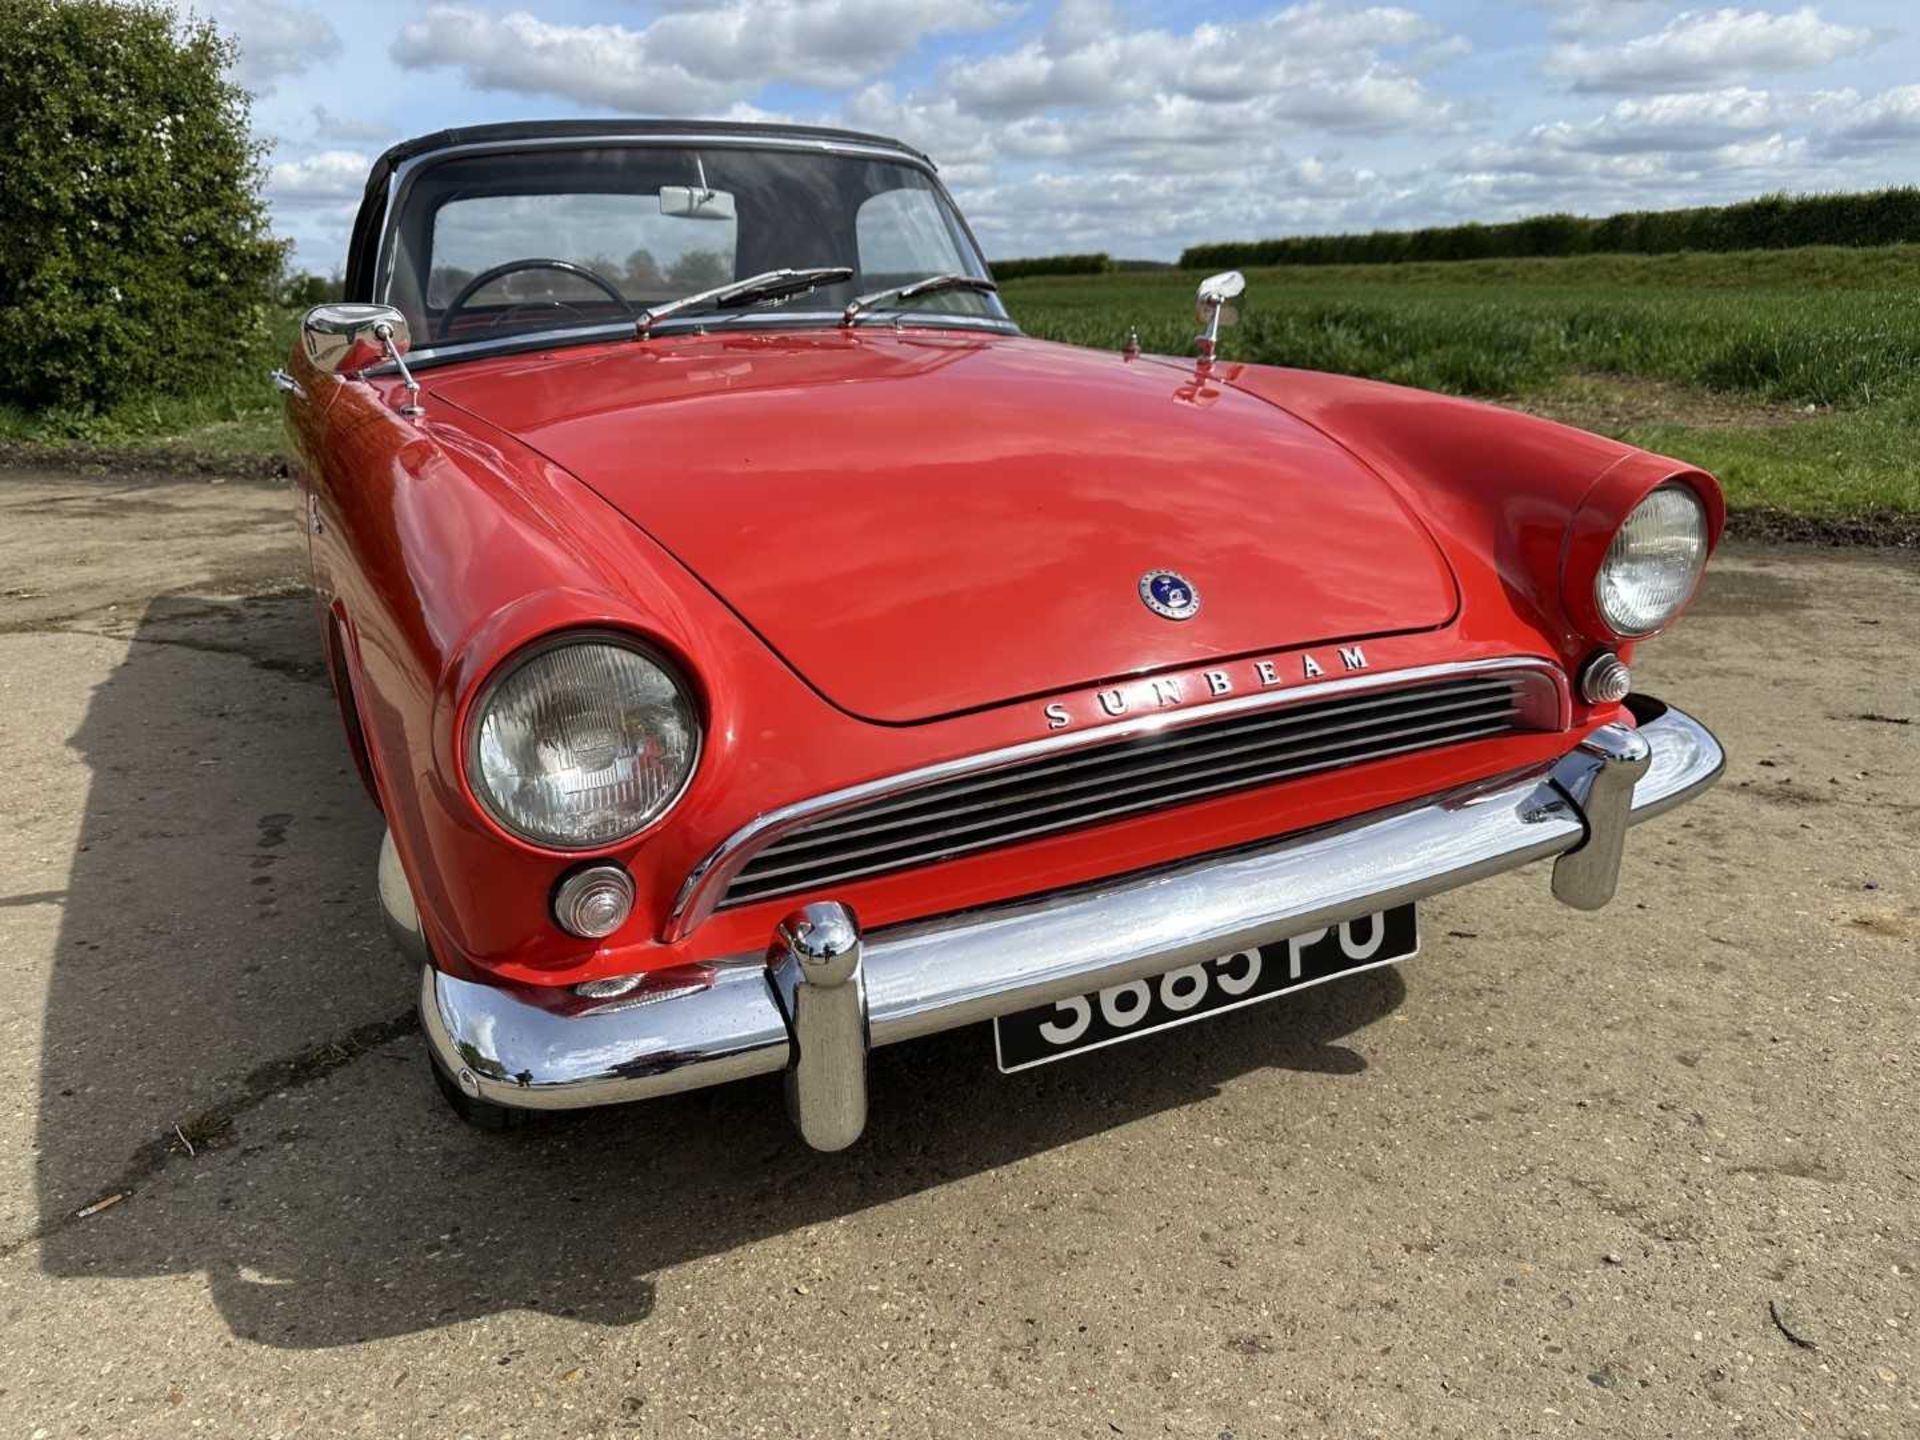 1960 Sunbeam Alpine sports convertible, 1600cc engine, manual gearbox with overdrive, reg. no. 3685 - Image 5 of 30